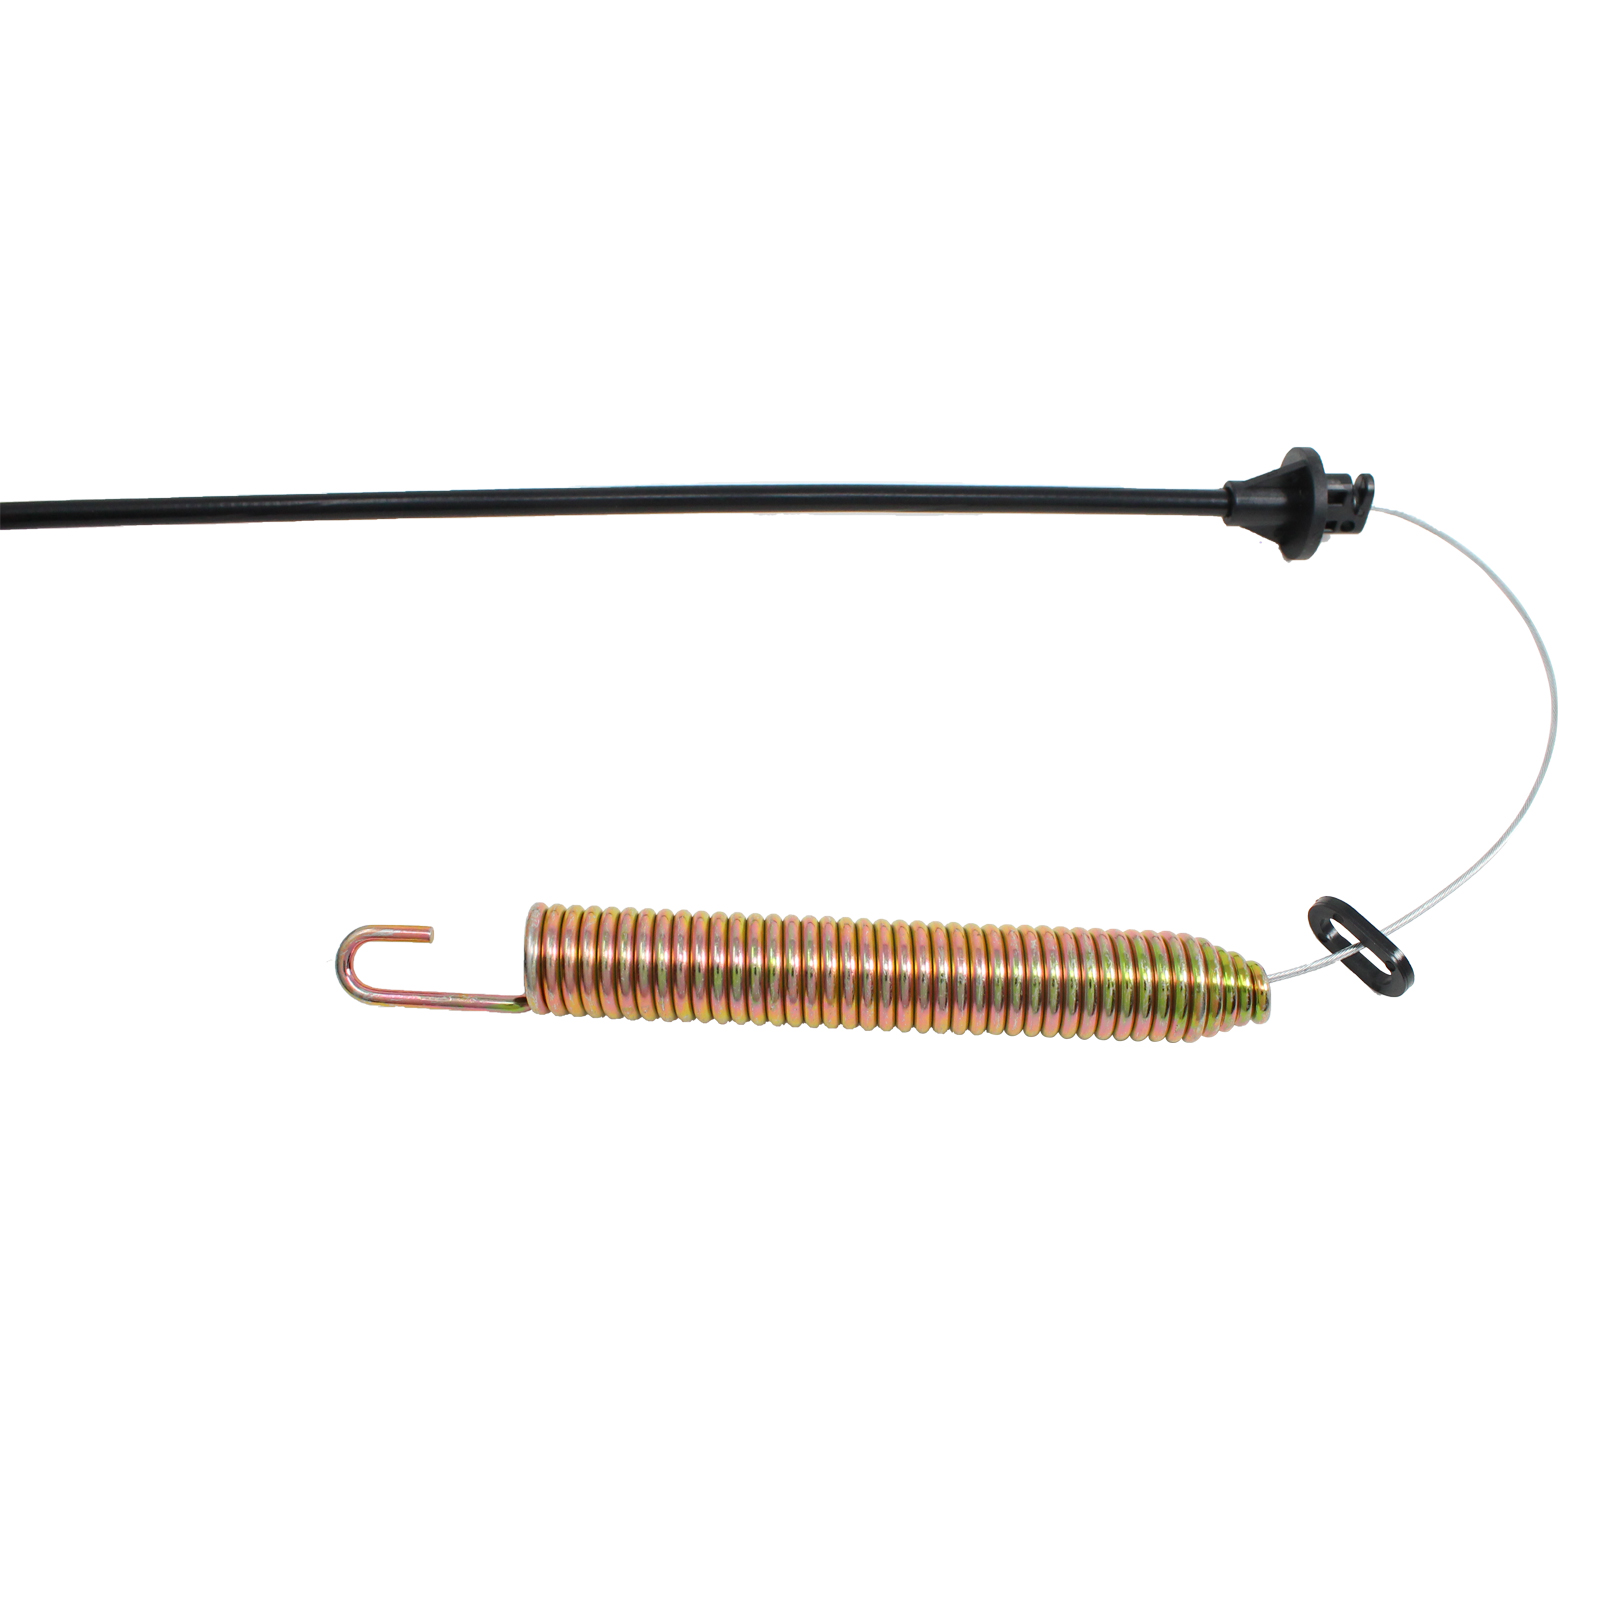 532175067 Blade Clutch Cable Replacement for Husqvarna LTH 1742 A (954570376) (2002-11) Ride Mower - Compatible with 175067 169676 Deck Clutch Cable - image 2 of 4